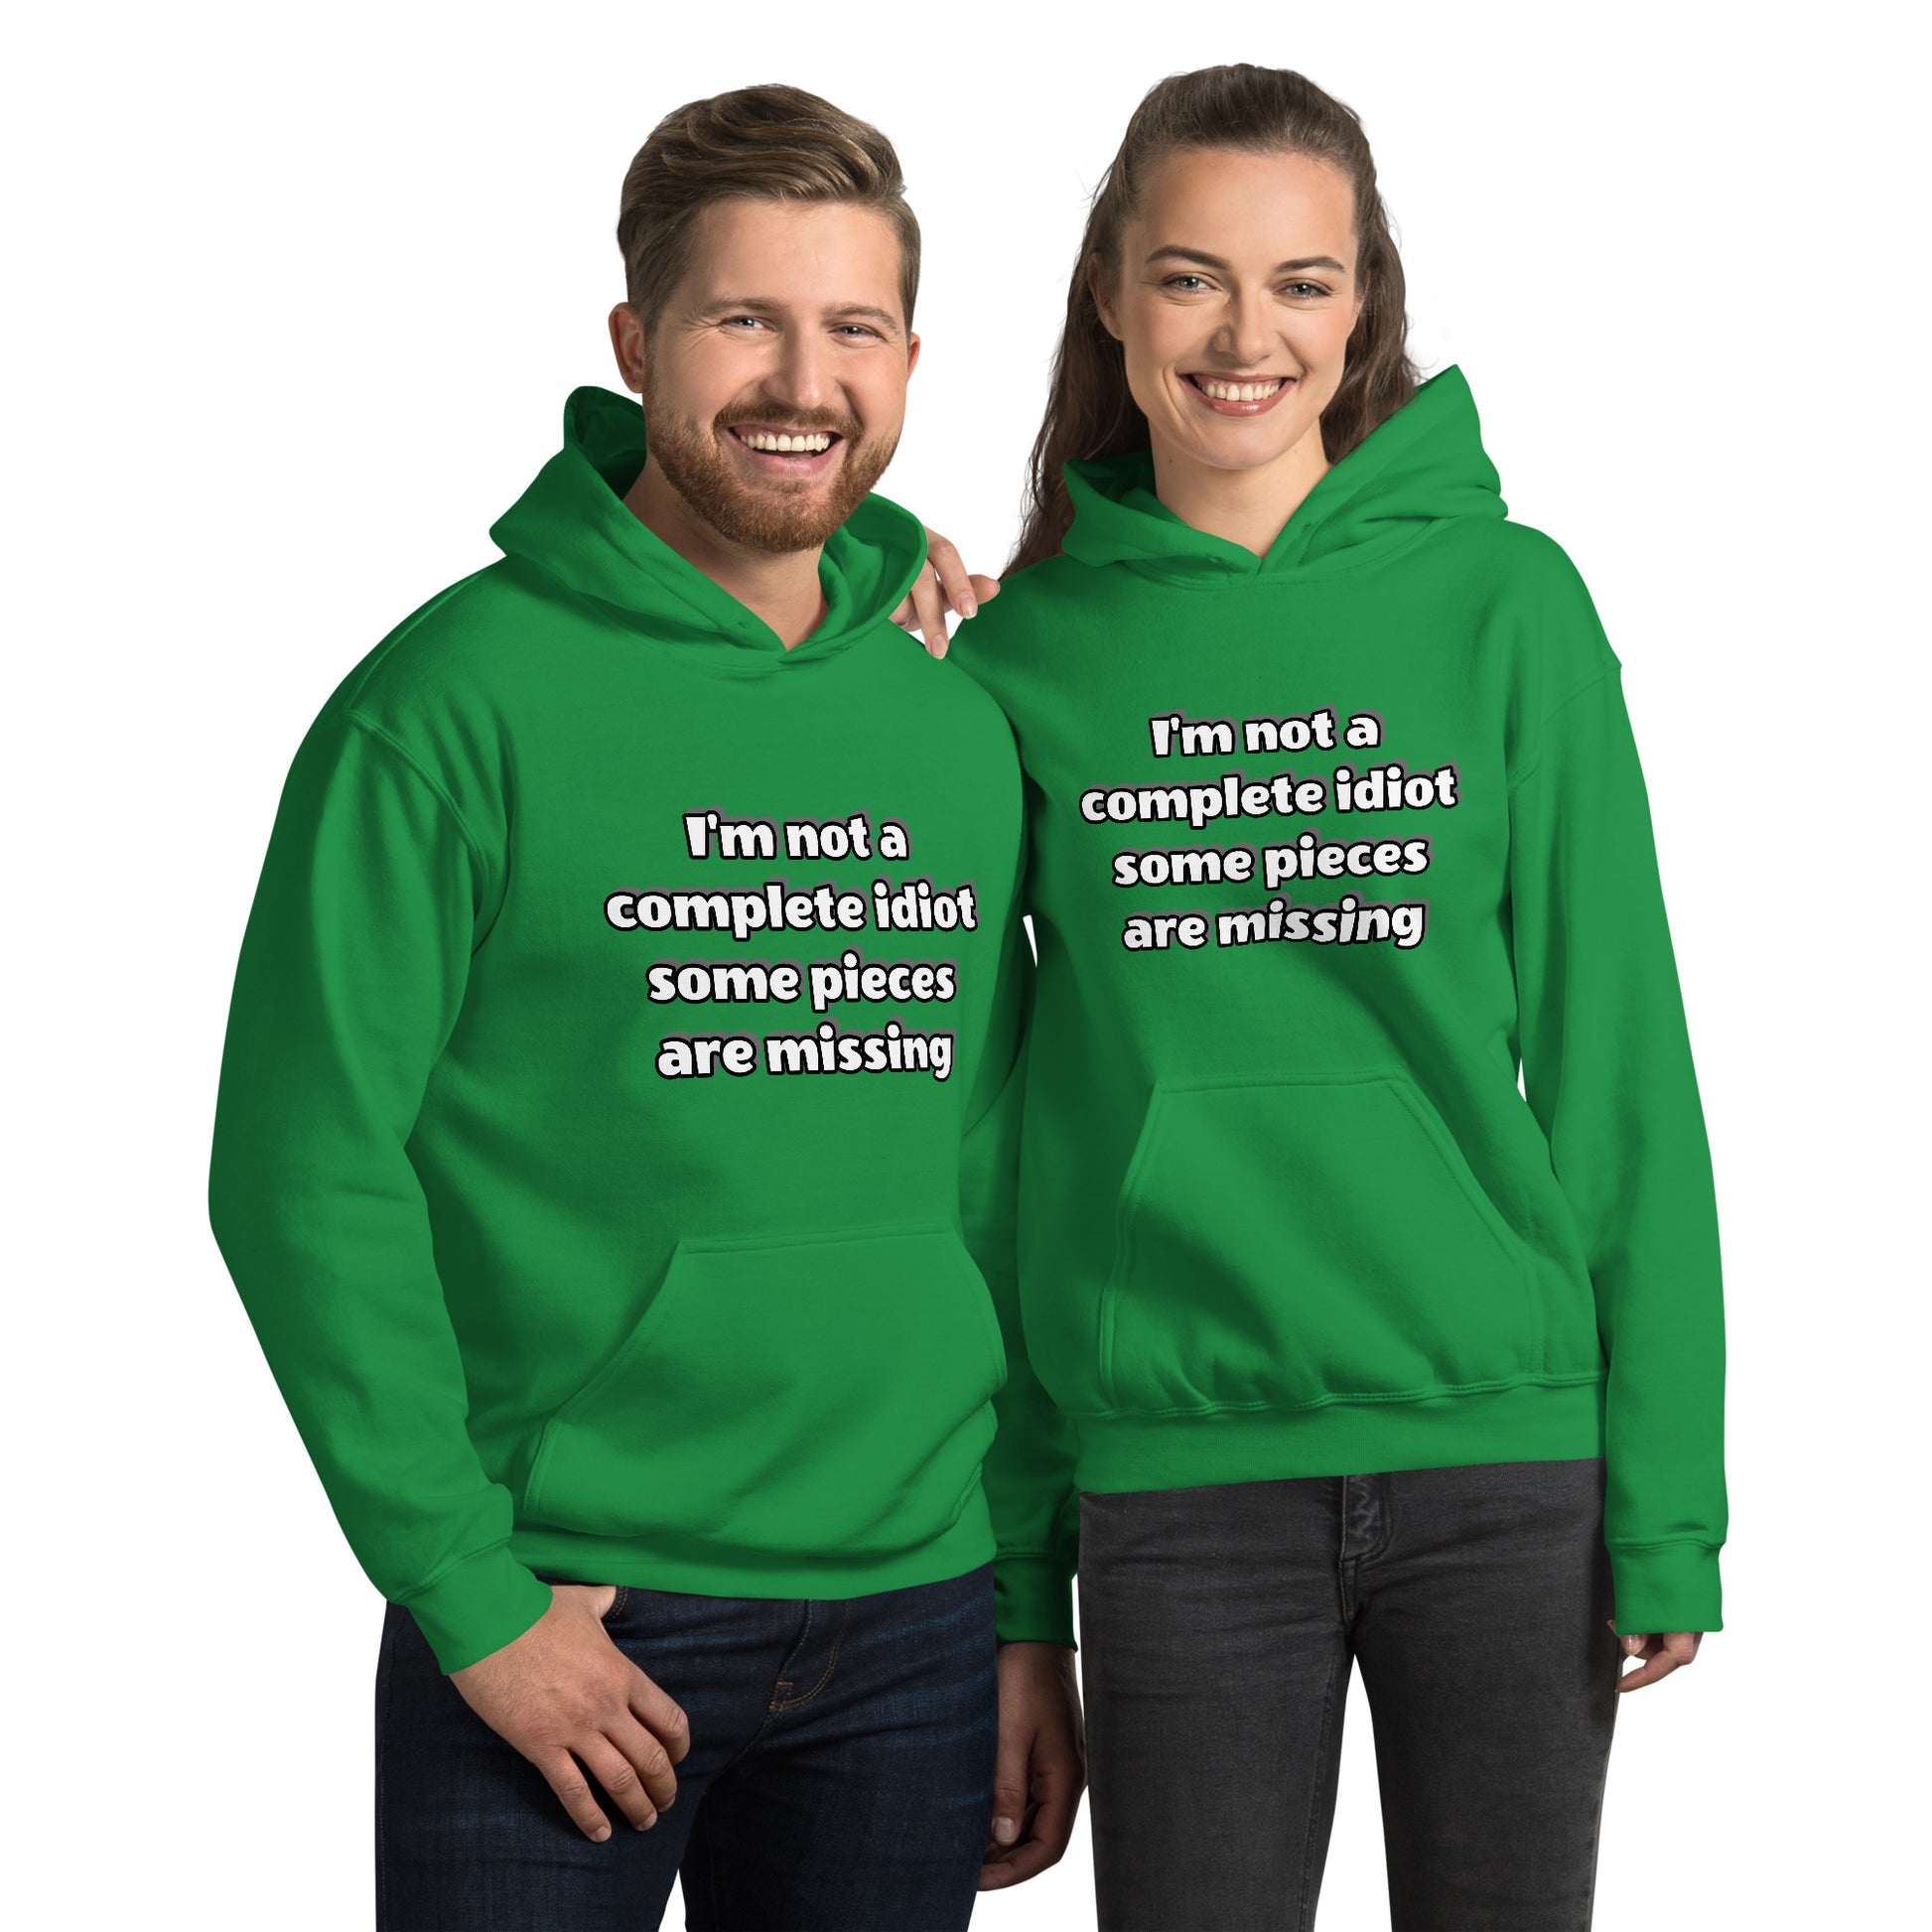 Men and women with Irish green hoodie with text “I’m not a complete idiot, some pieces are missing”